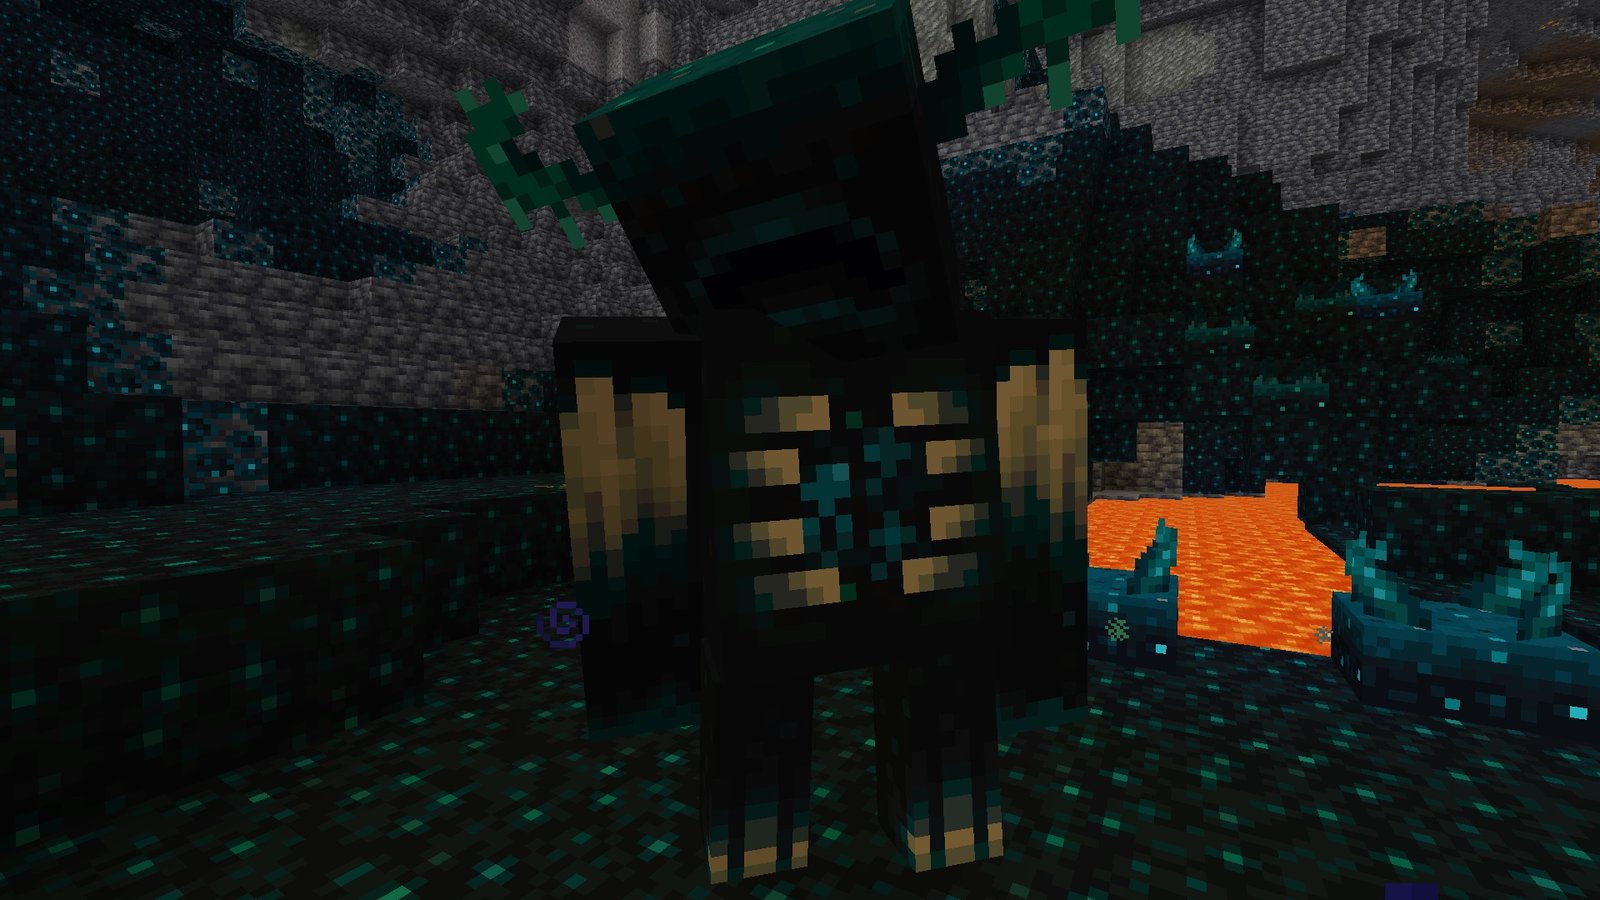 Minecraft - A Warden mob with its glowing teal heart, large body, and antennae, stands in a Deep Dark biome surrounded by lava